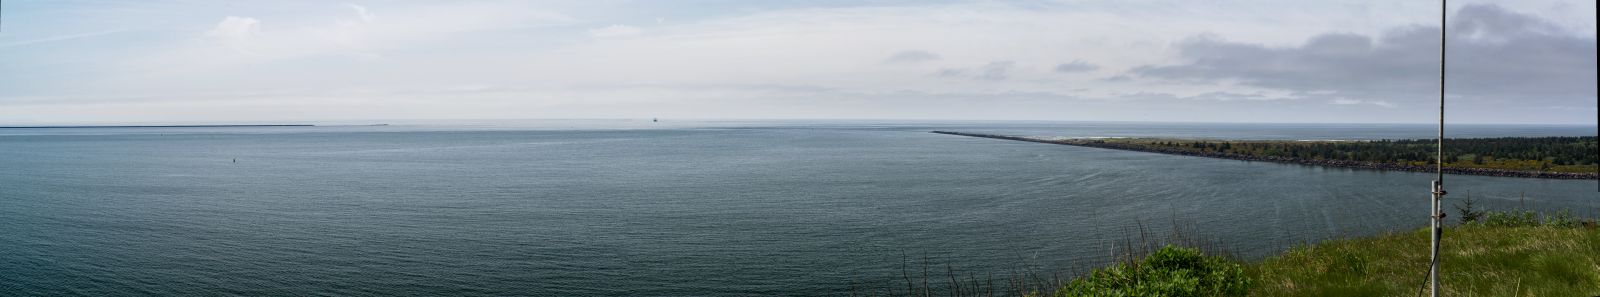 Panorama view of the mouth of the Columbia River from Cape Disappointment, WA